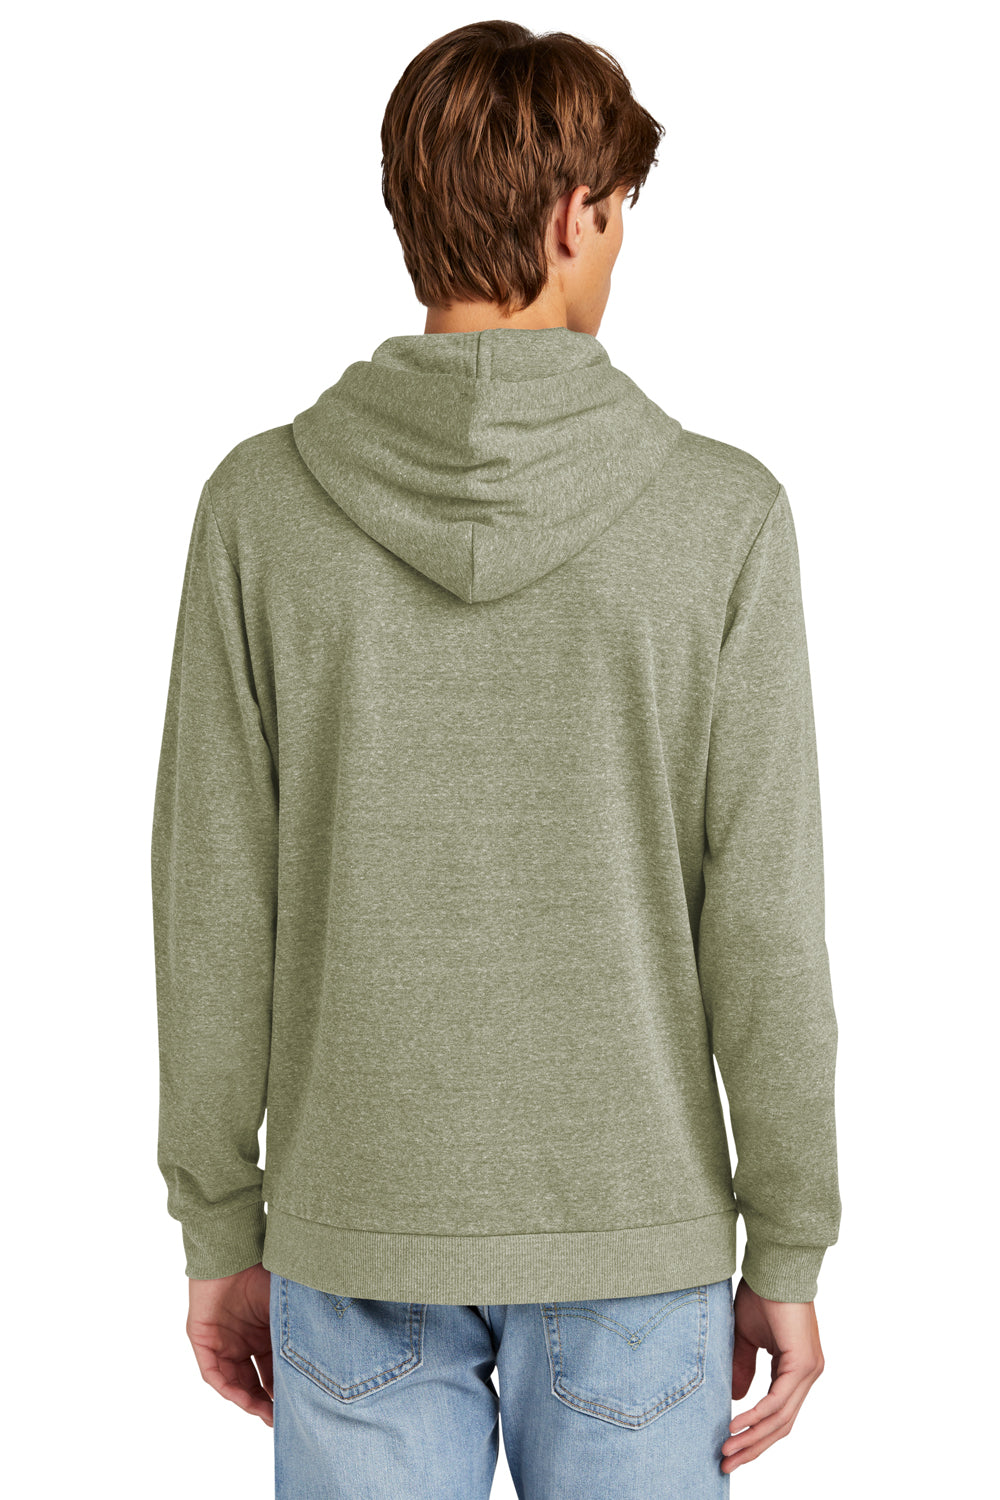 District DT1300 Mens Perfect Tri Fleece Hooded Sweatshirt Hoodie Military Green Frost Back